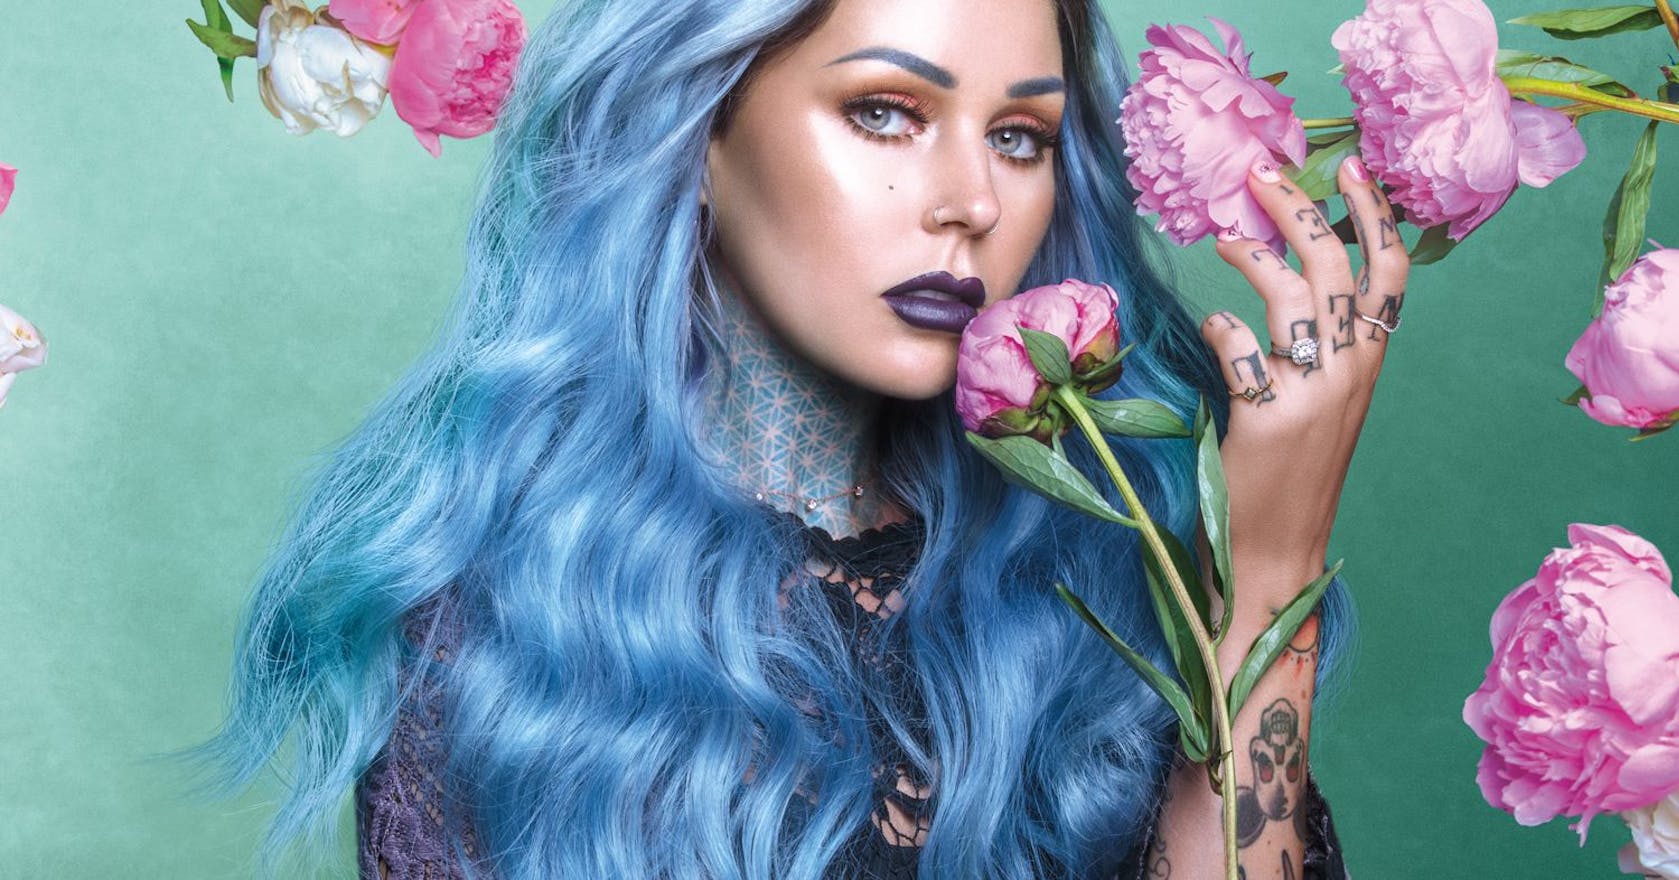 2. How to Achieve Kristen Leanne's Blue Hair Look - wide 8